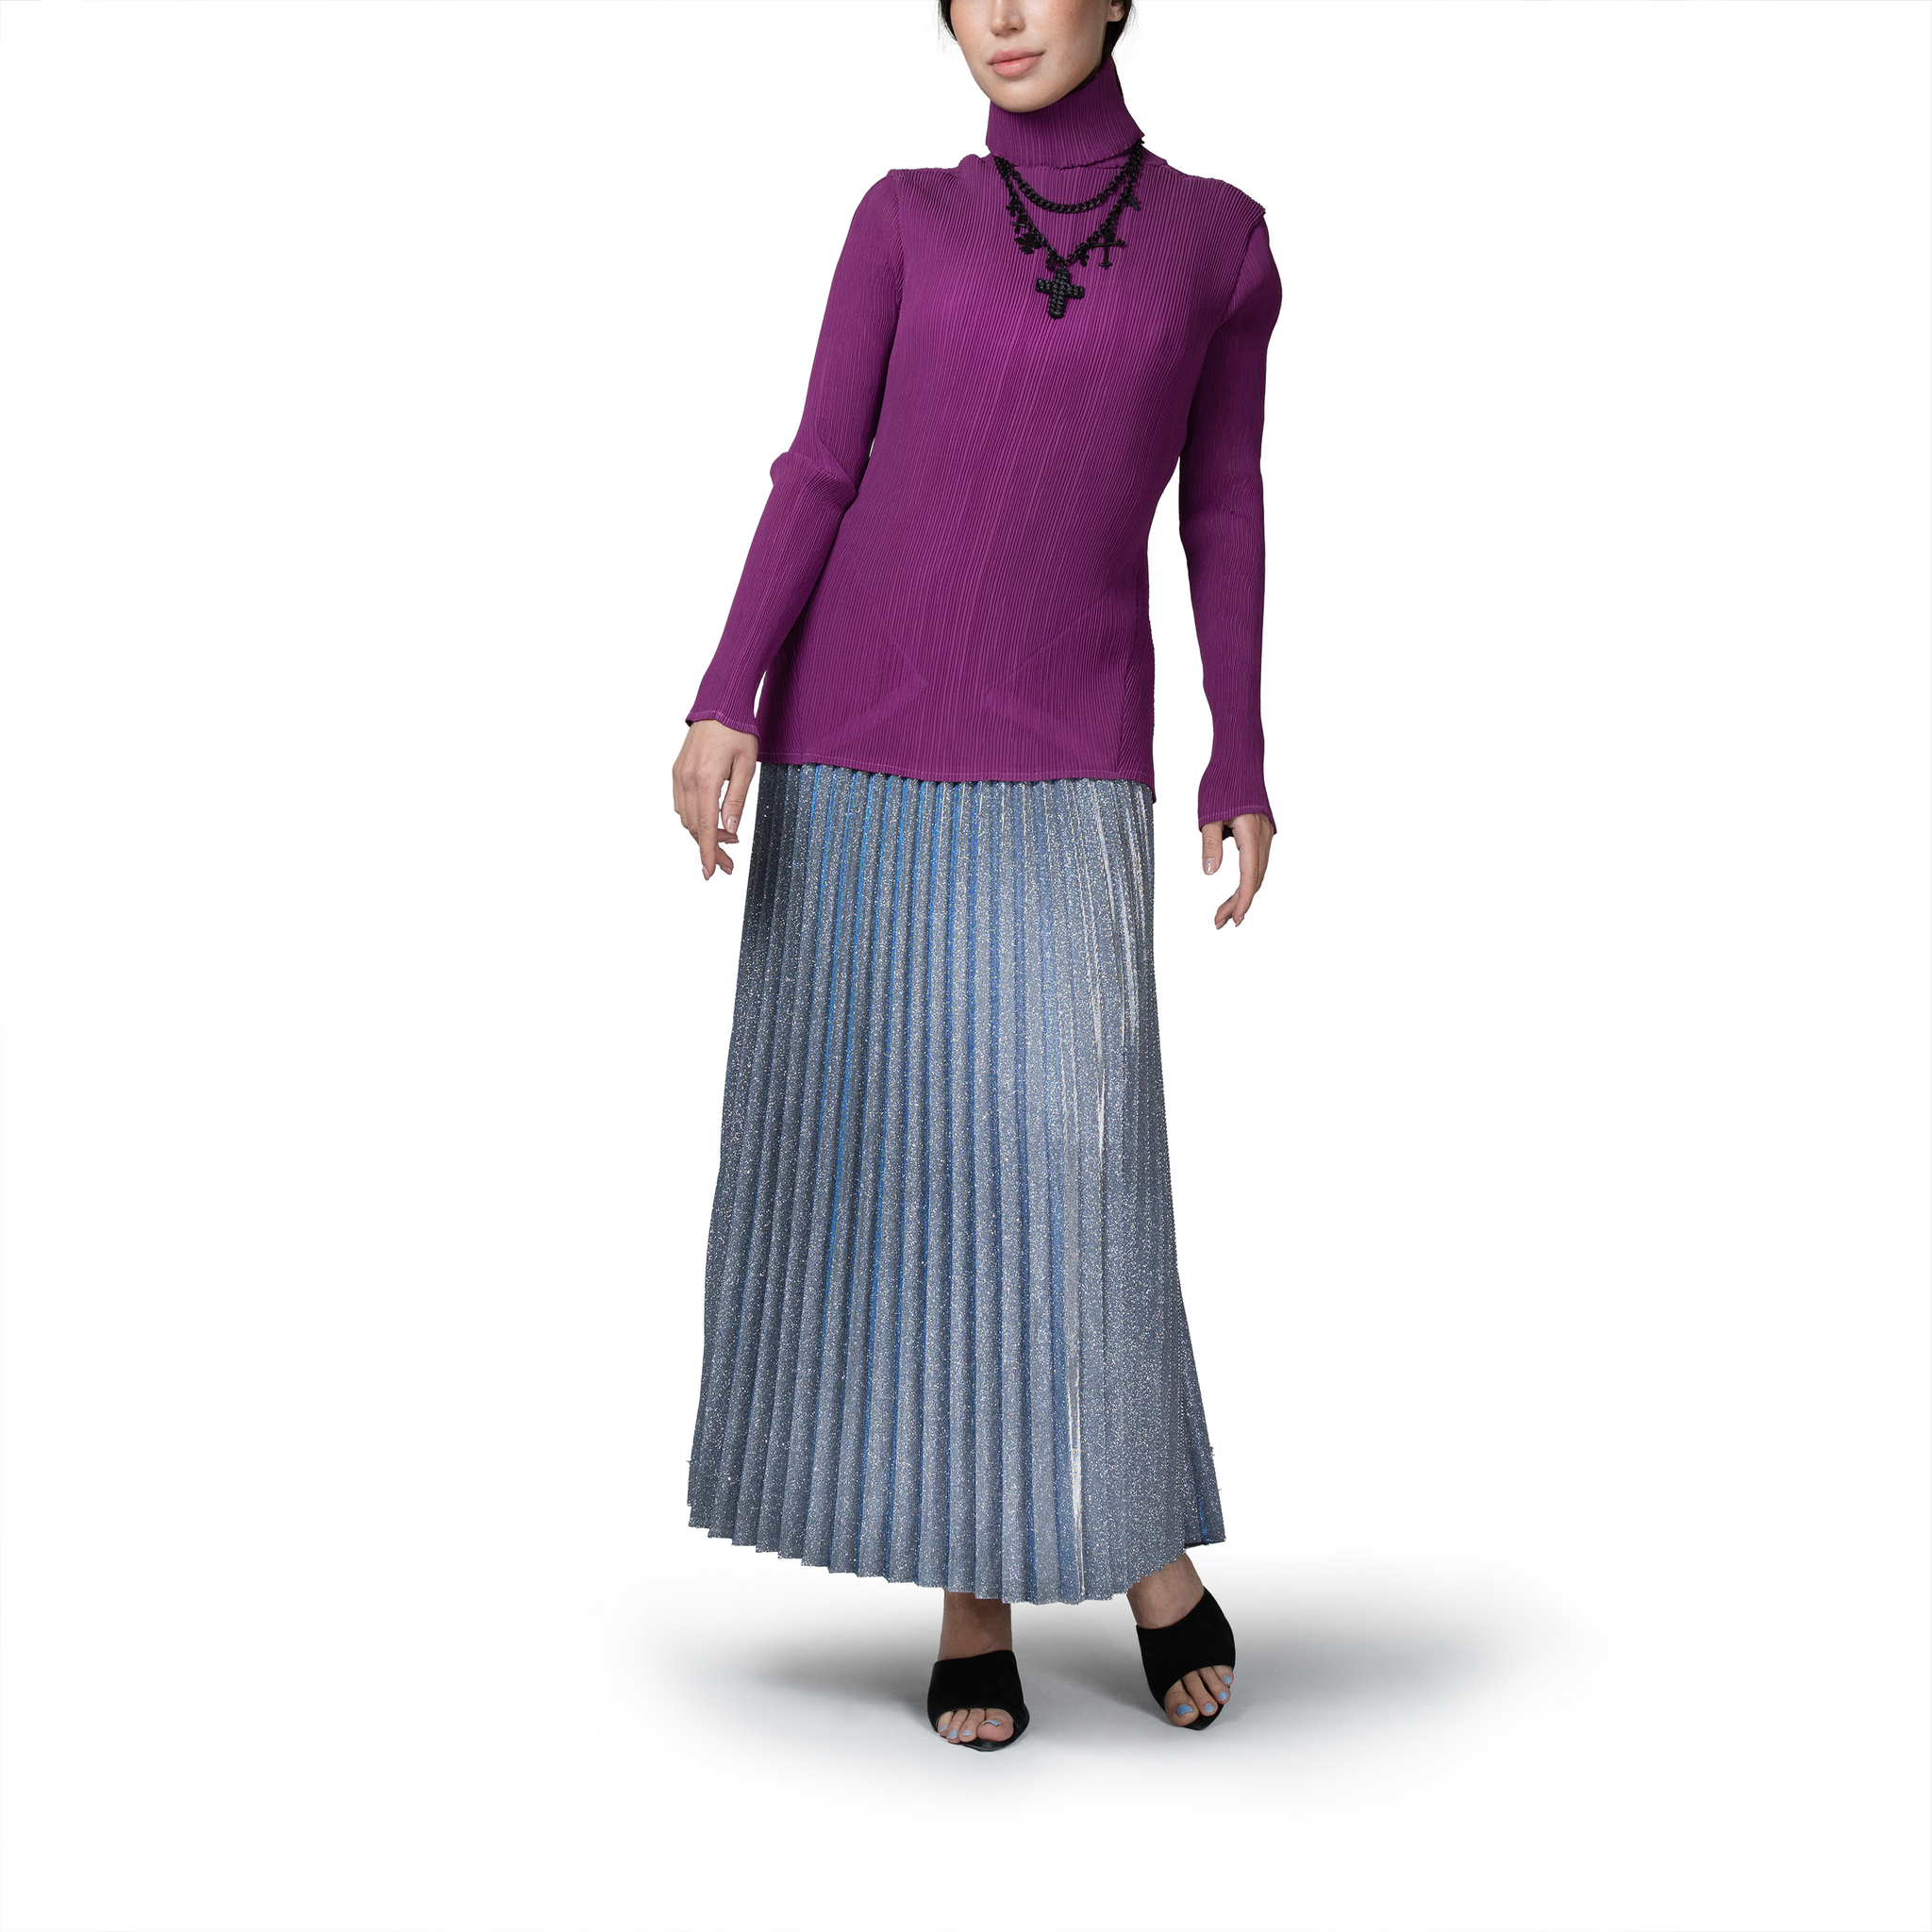 Pleated hight-neck top